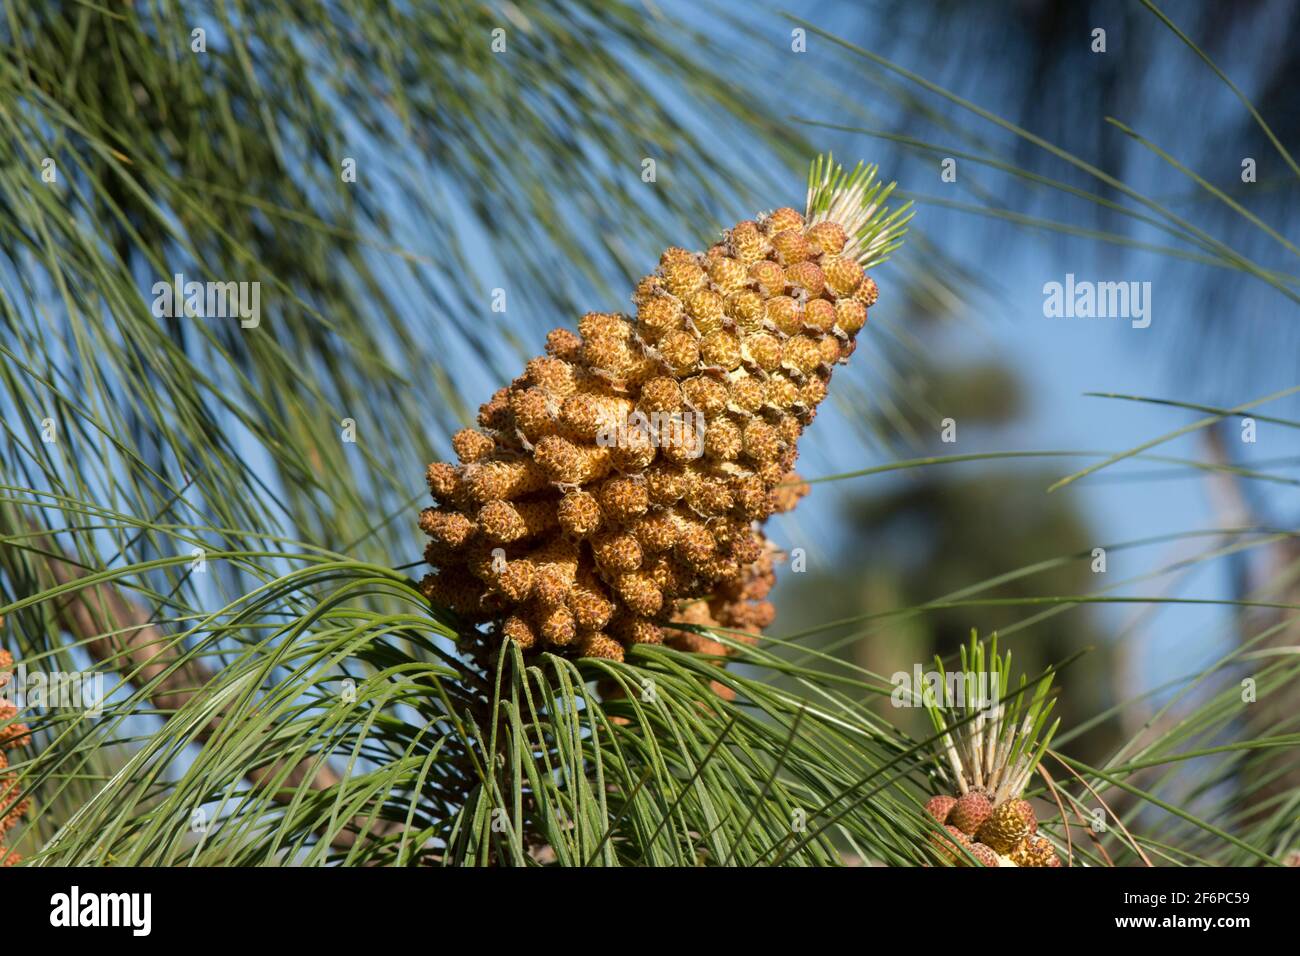 Immature male cones of  Pinus canariensis, the Canary Island pine, Spain, Europe. Stock Photo